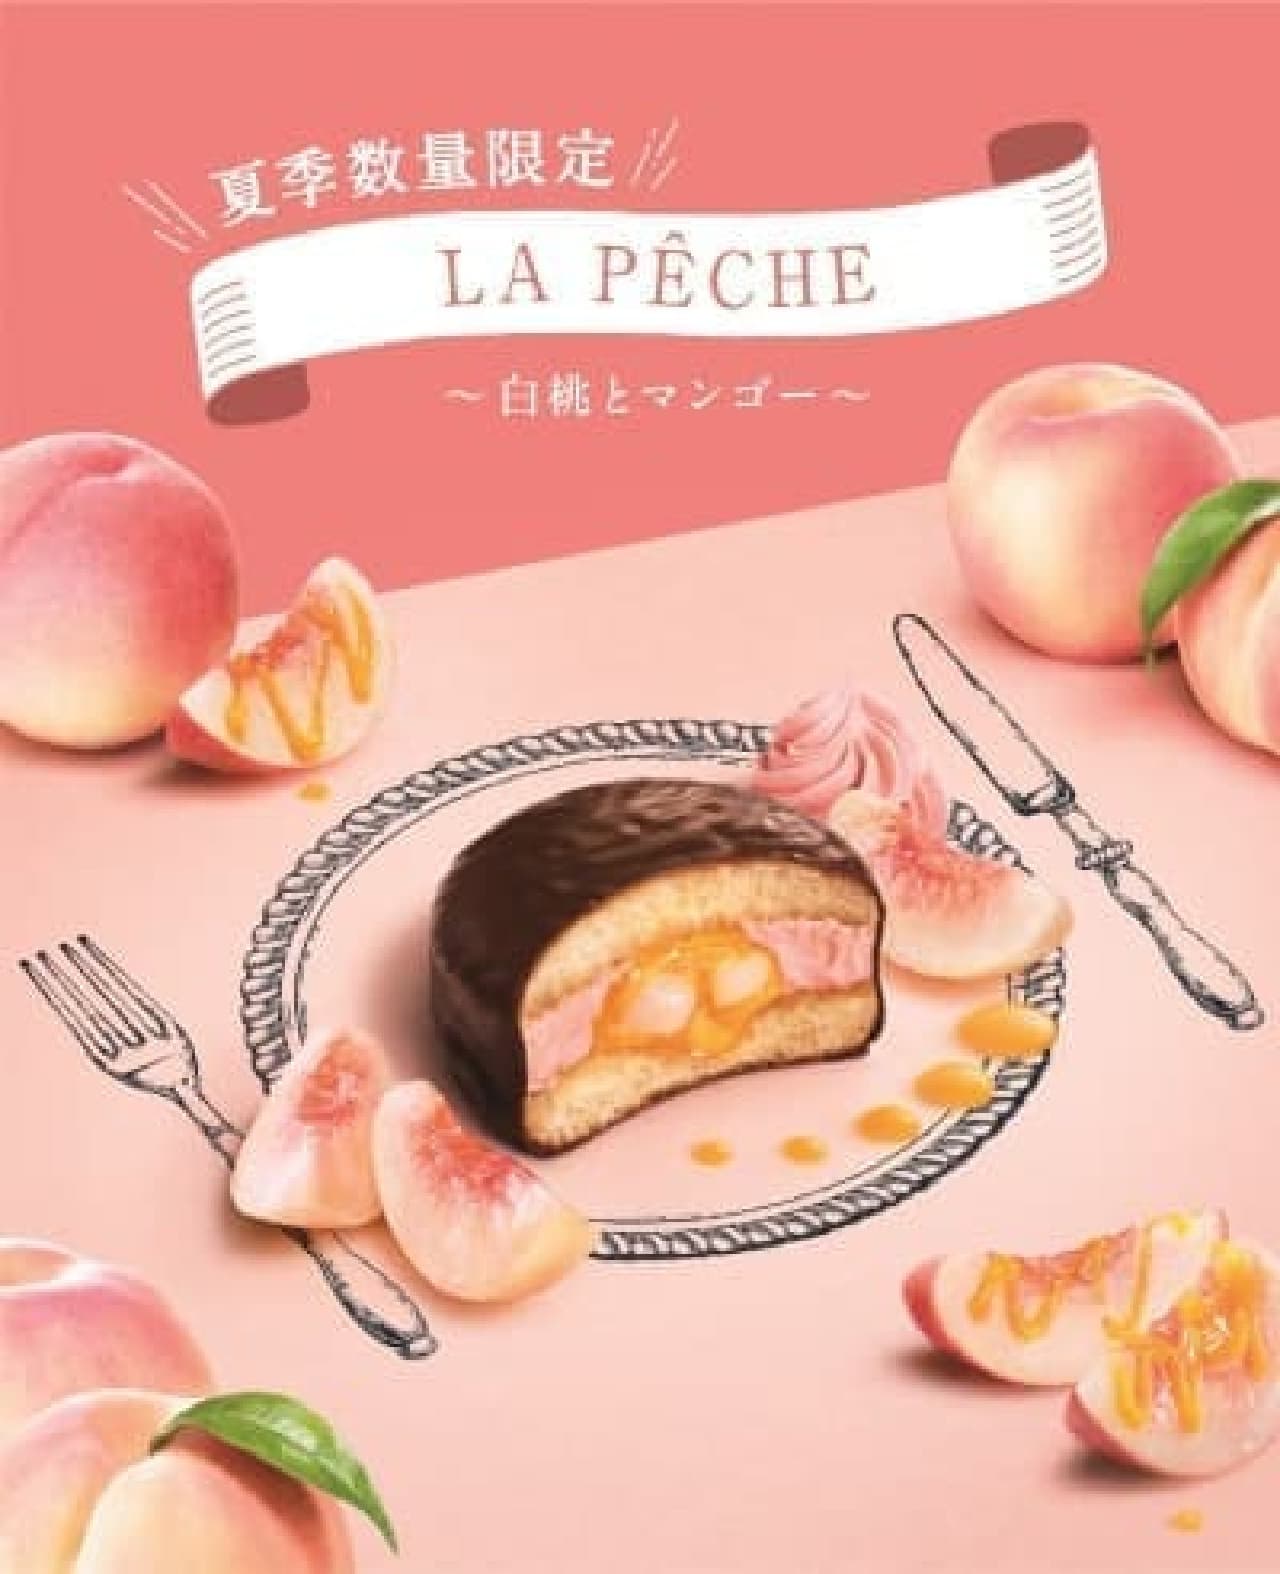 "Choco pie" For the first time in history, "raw" choco pie with white peach pulp